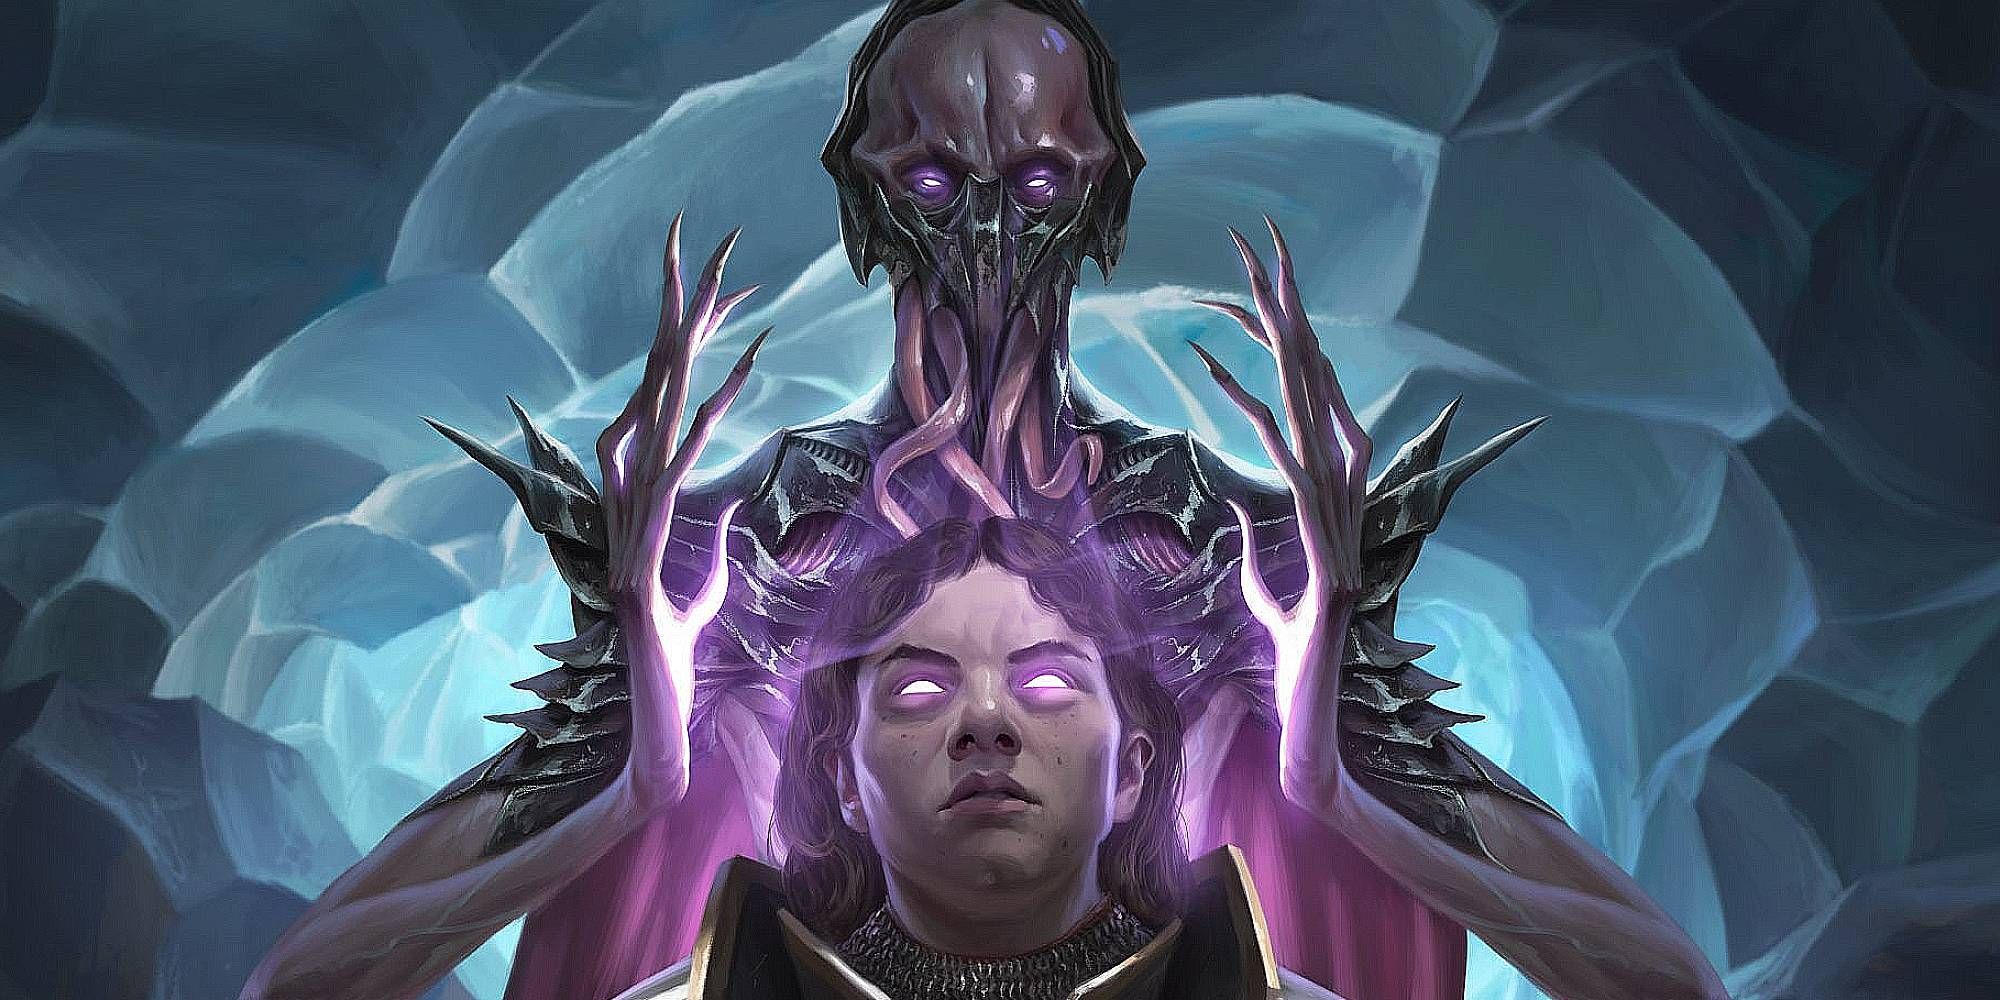 A Mindflayer invades the mind of a humanoid